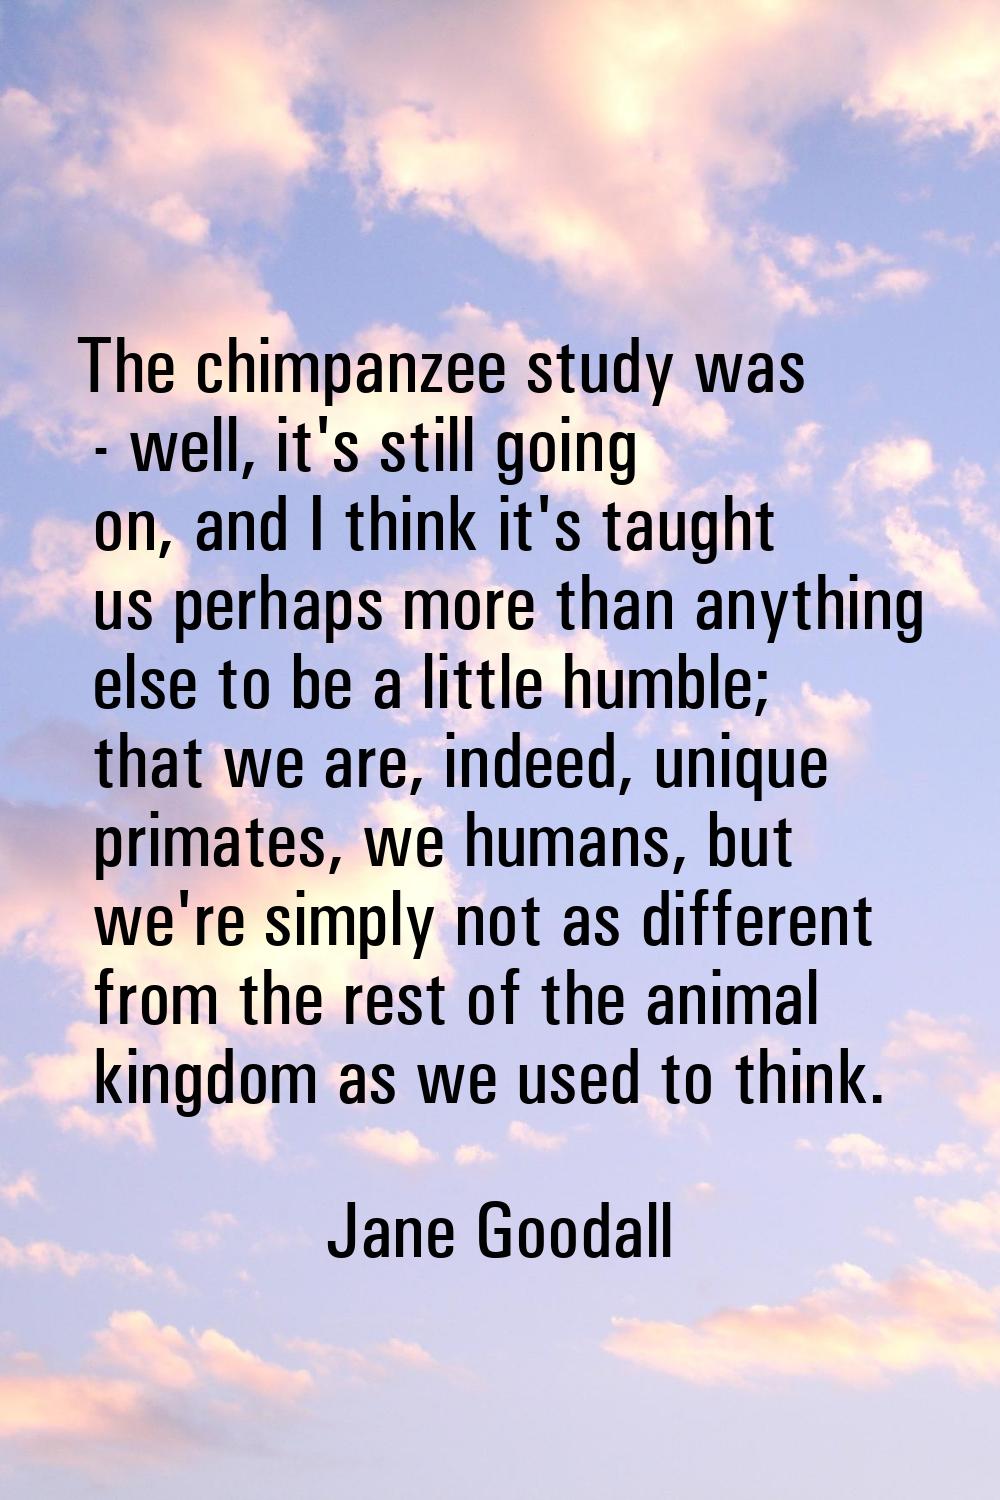 The chimpanzee study was - well, it's still going on, and I think it's taught us perhaps more than 